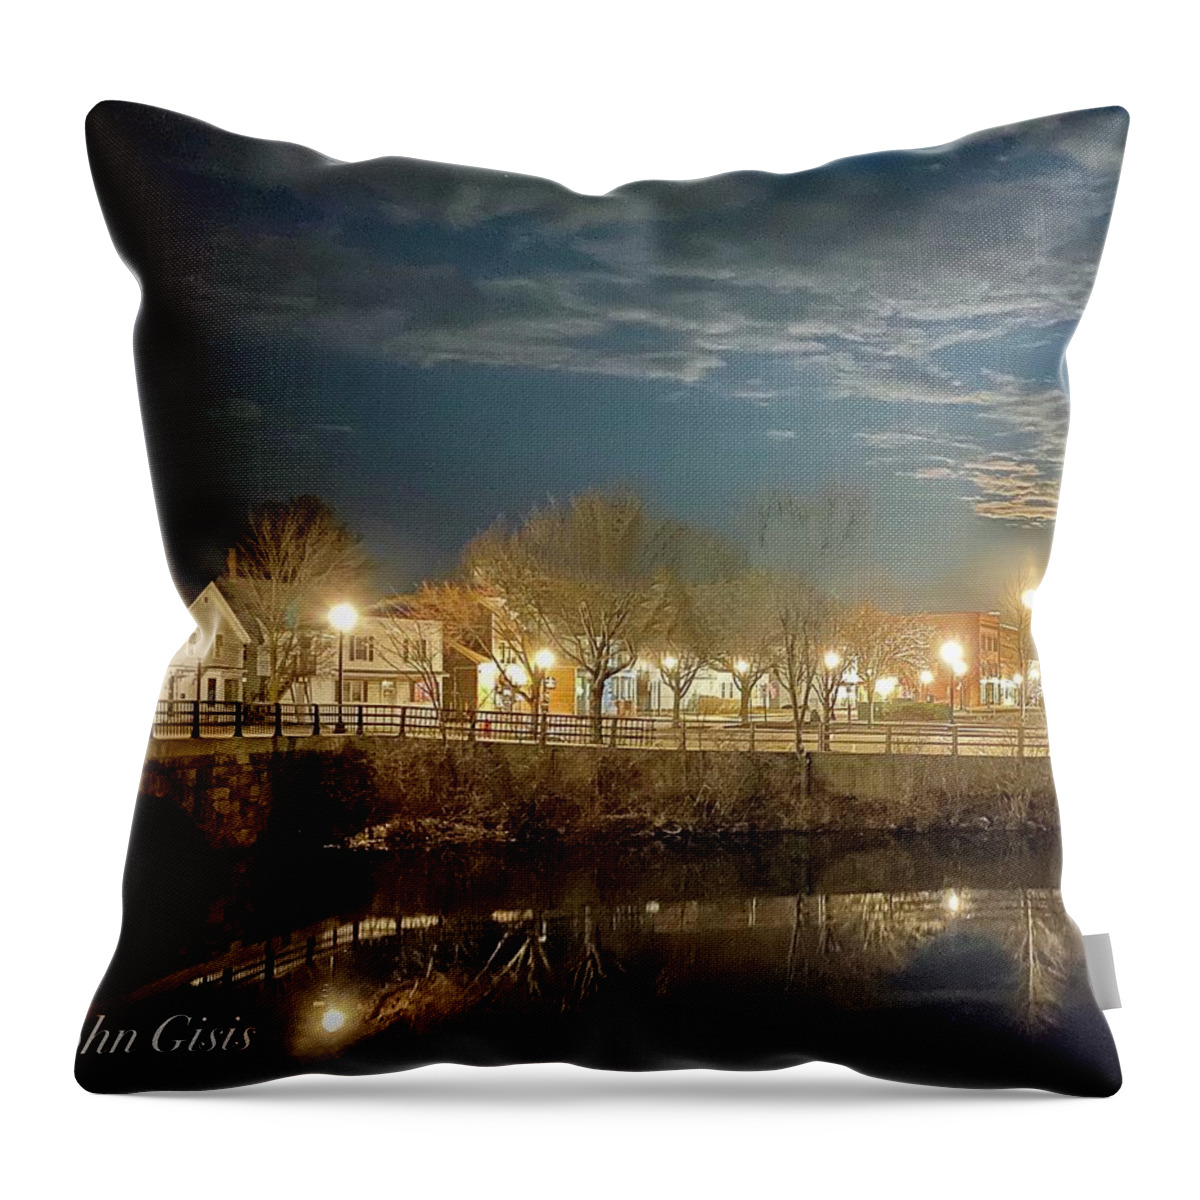  Throw Pillow featuring the photograph Rochester #22 by John Gisis